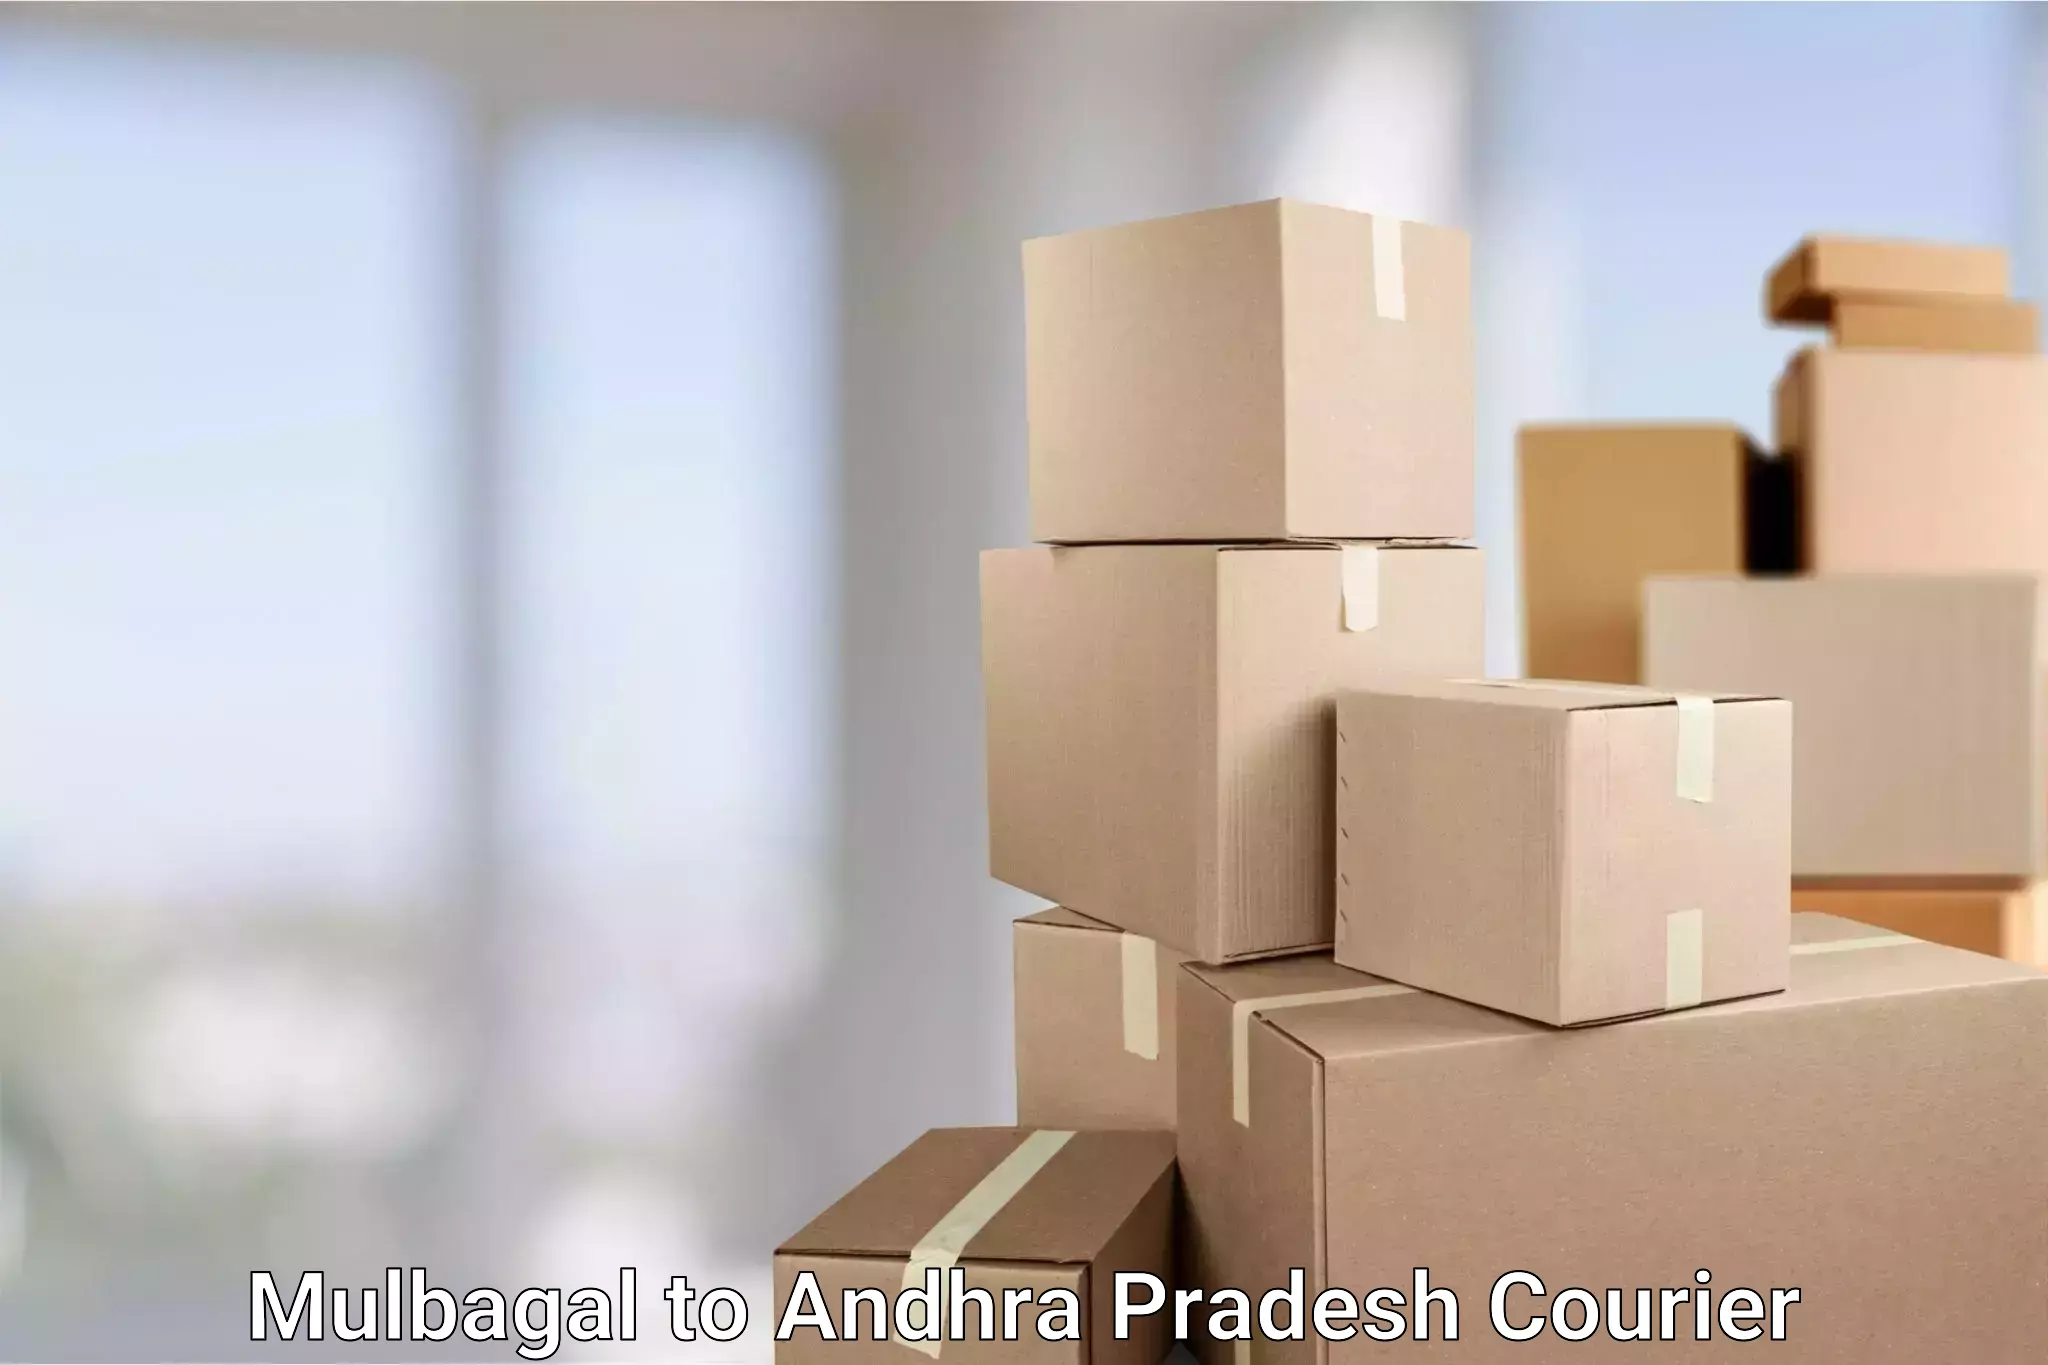 Multi-package shipping Mulbagal to Tirupati